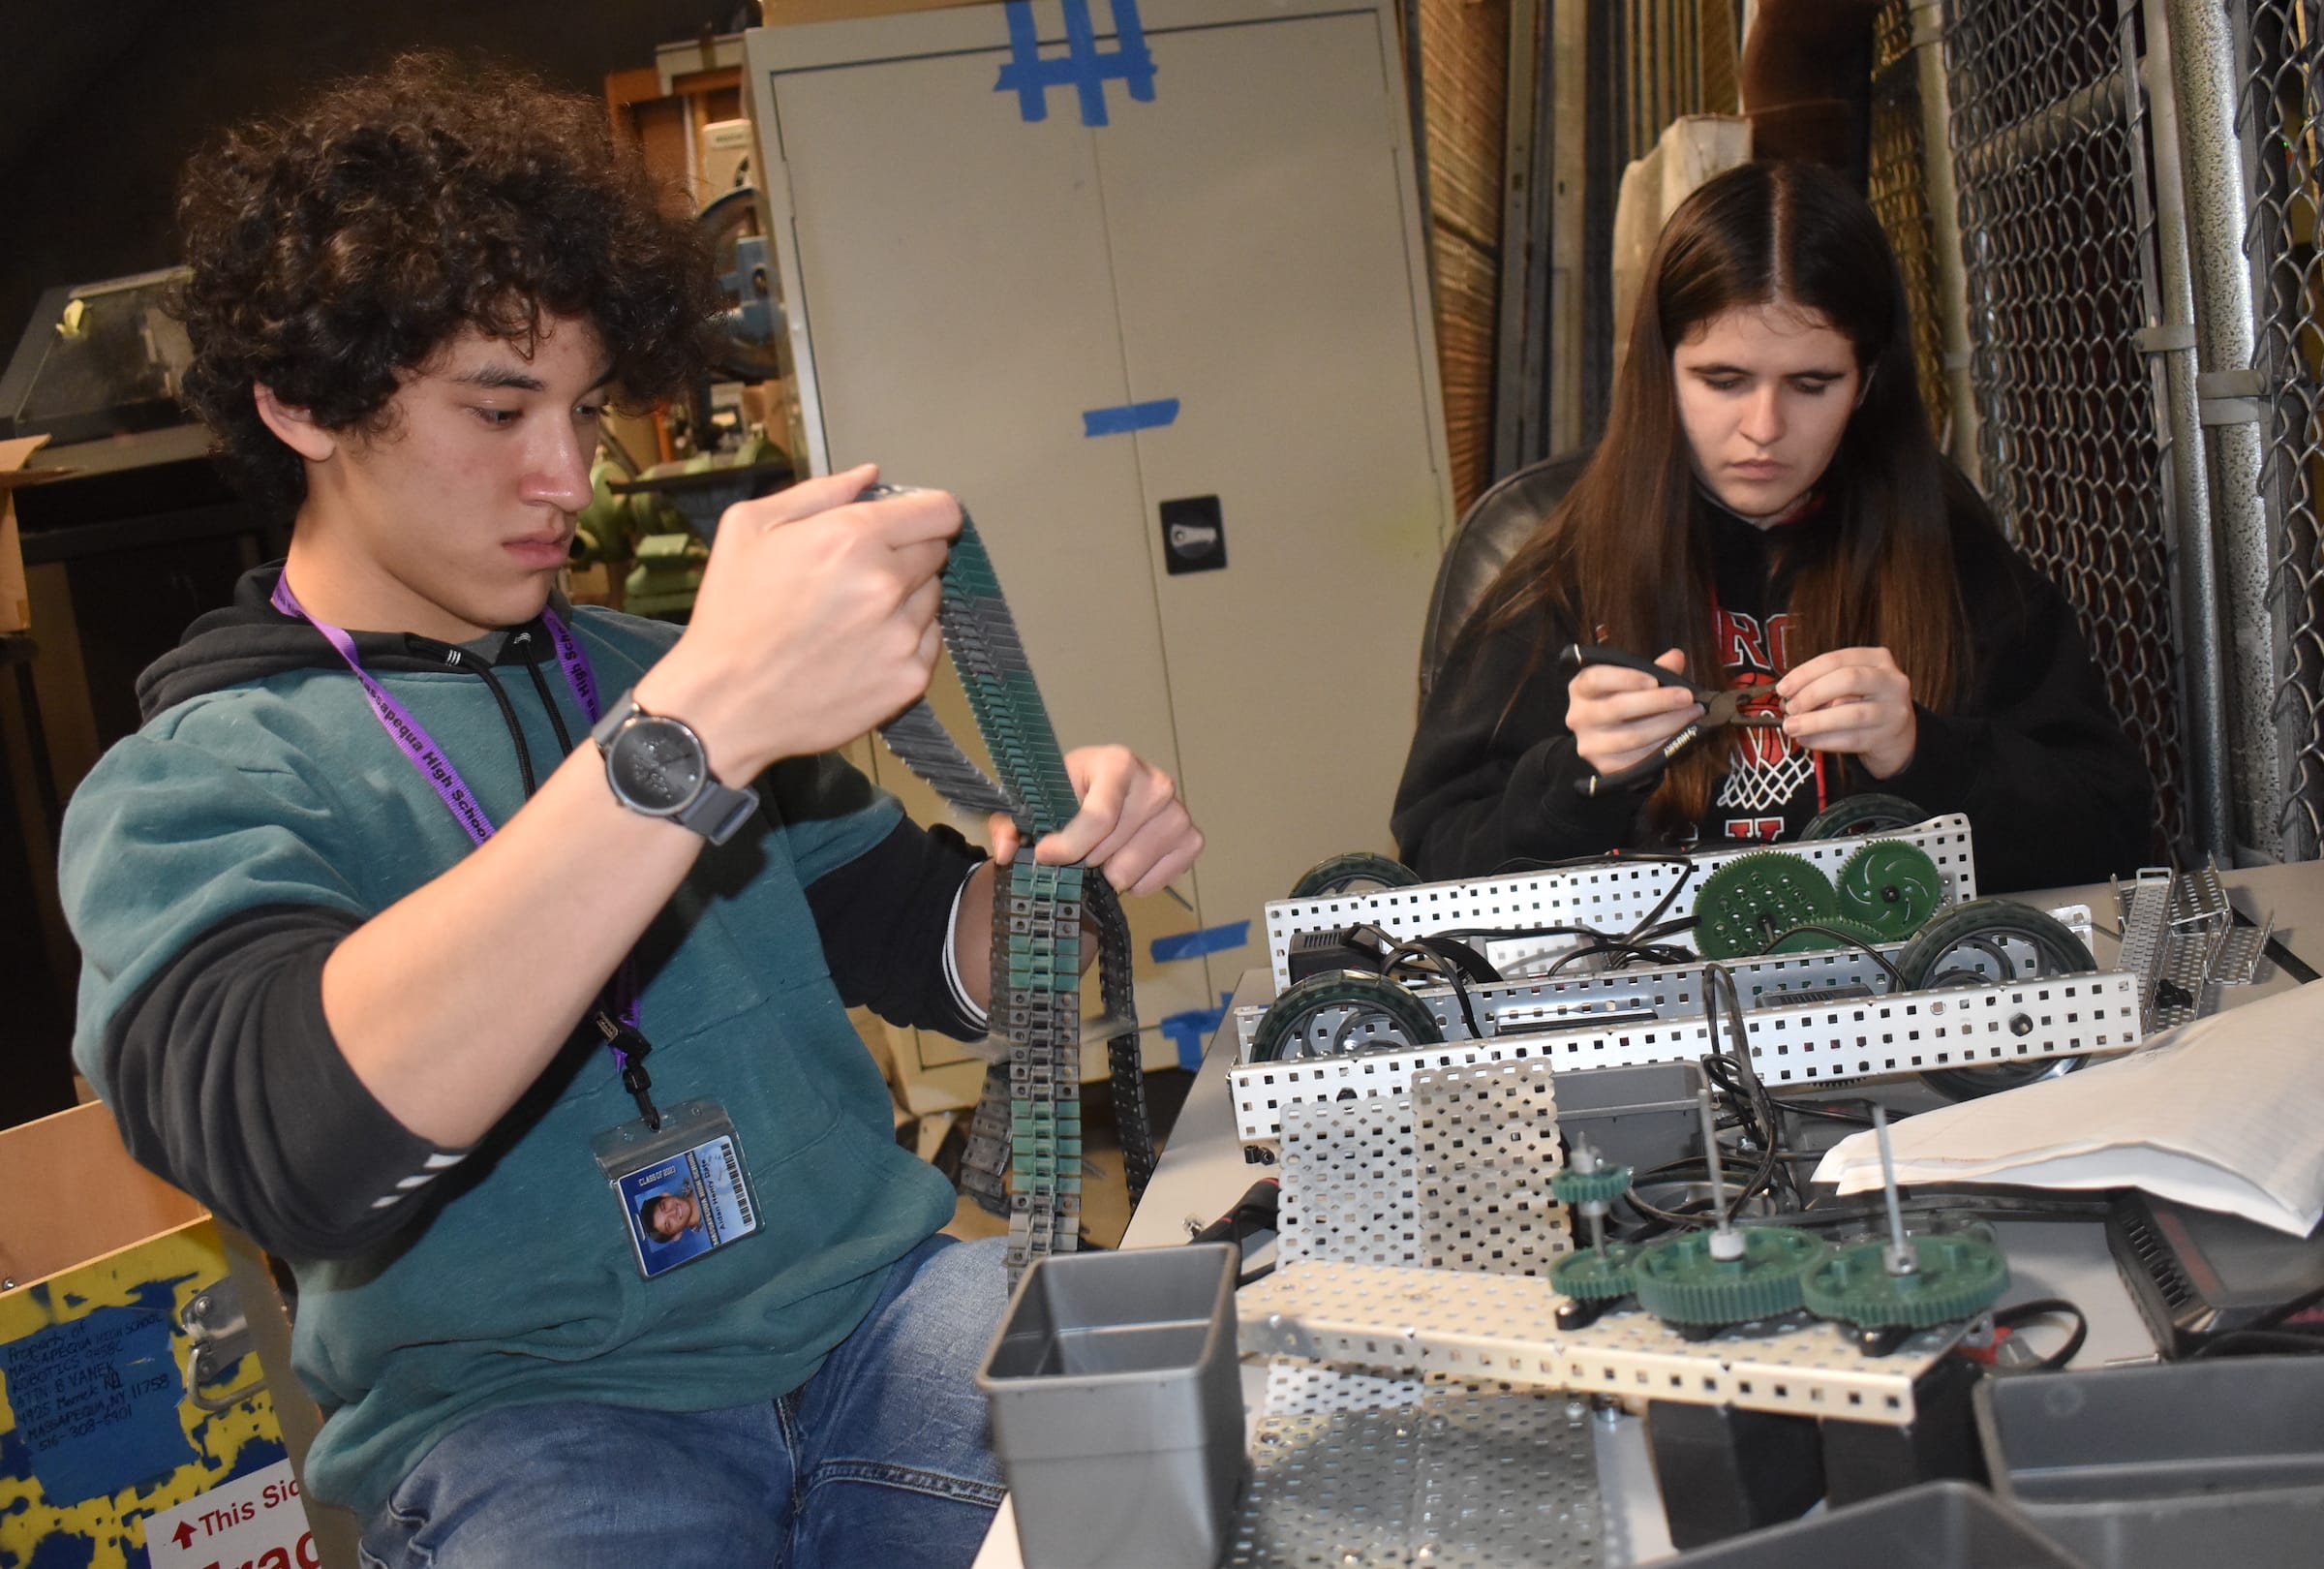 Massapequa’s Robot Enthusiasts Are Ready For A Challenge